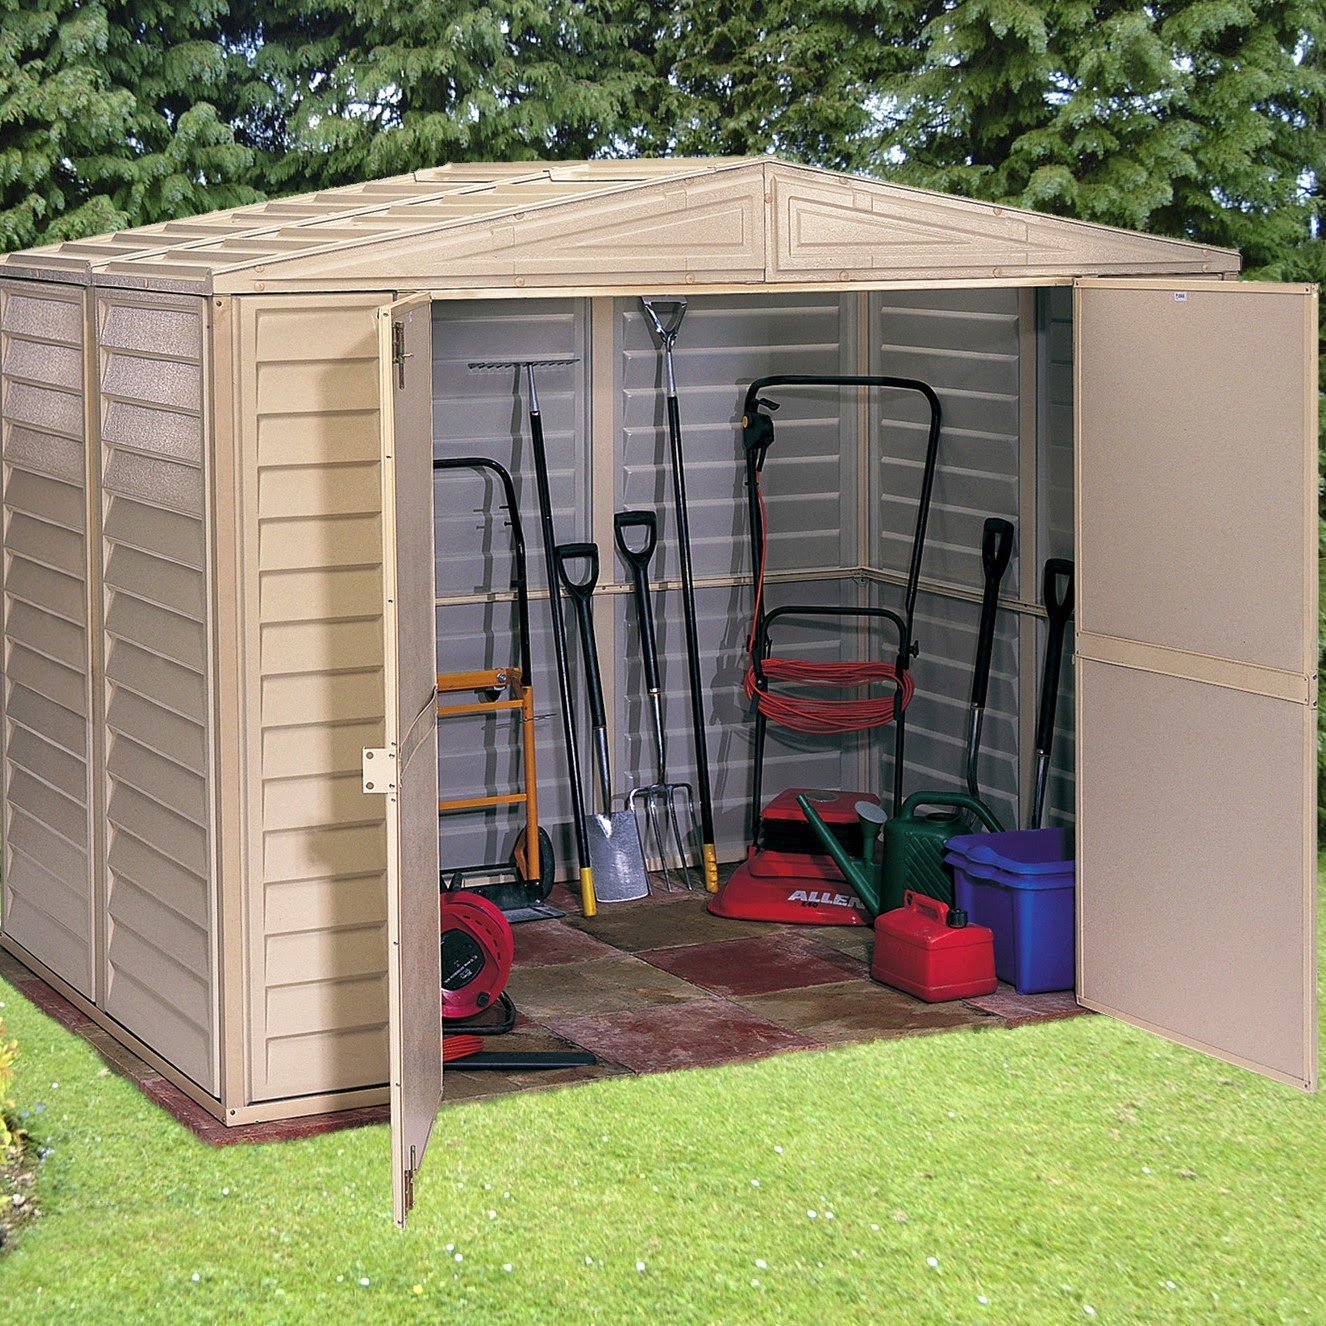 Outdoor Storage Sheds Options To Consider Before You Buy Wise